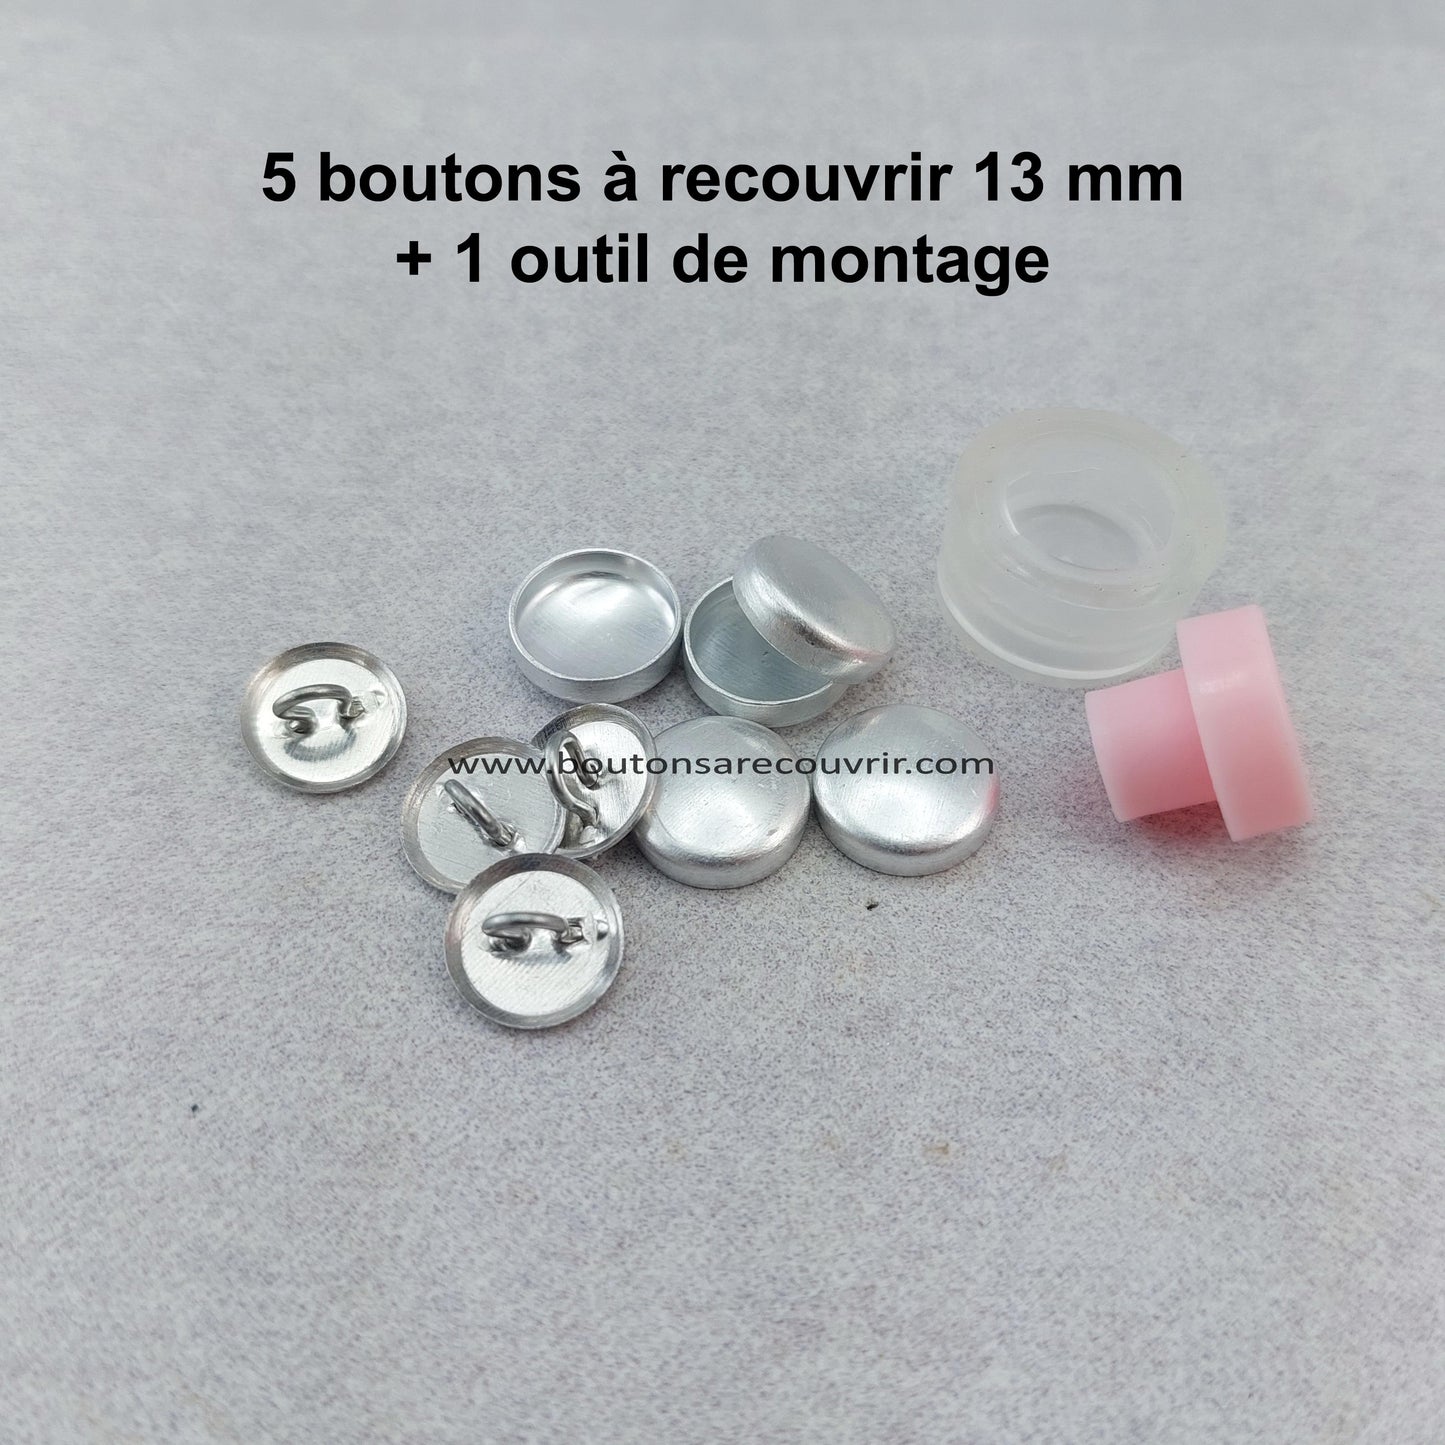 5 boutons à recouvrir 13 mm + outil montage